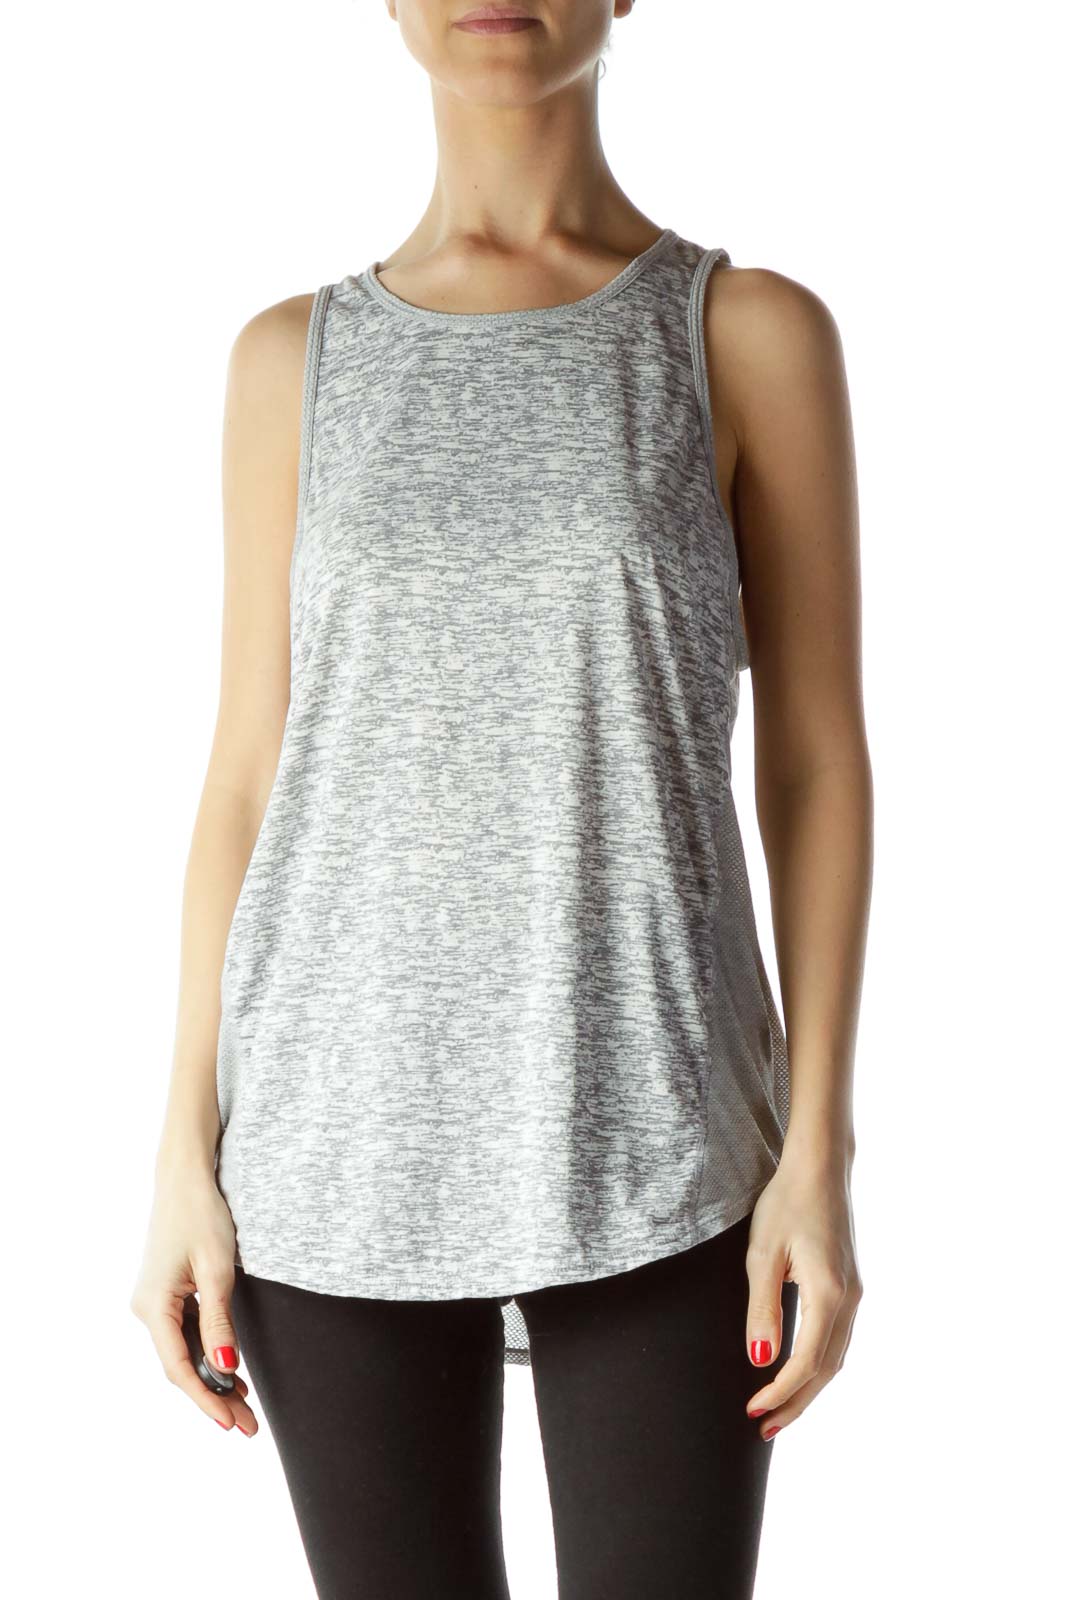 Gray Sleeveless Sports Top Front